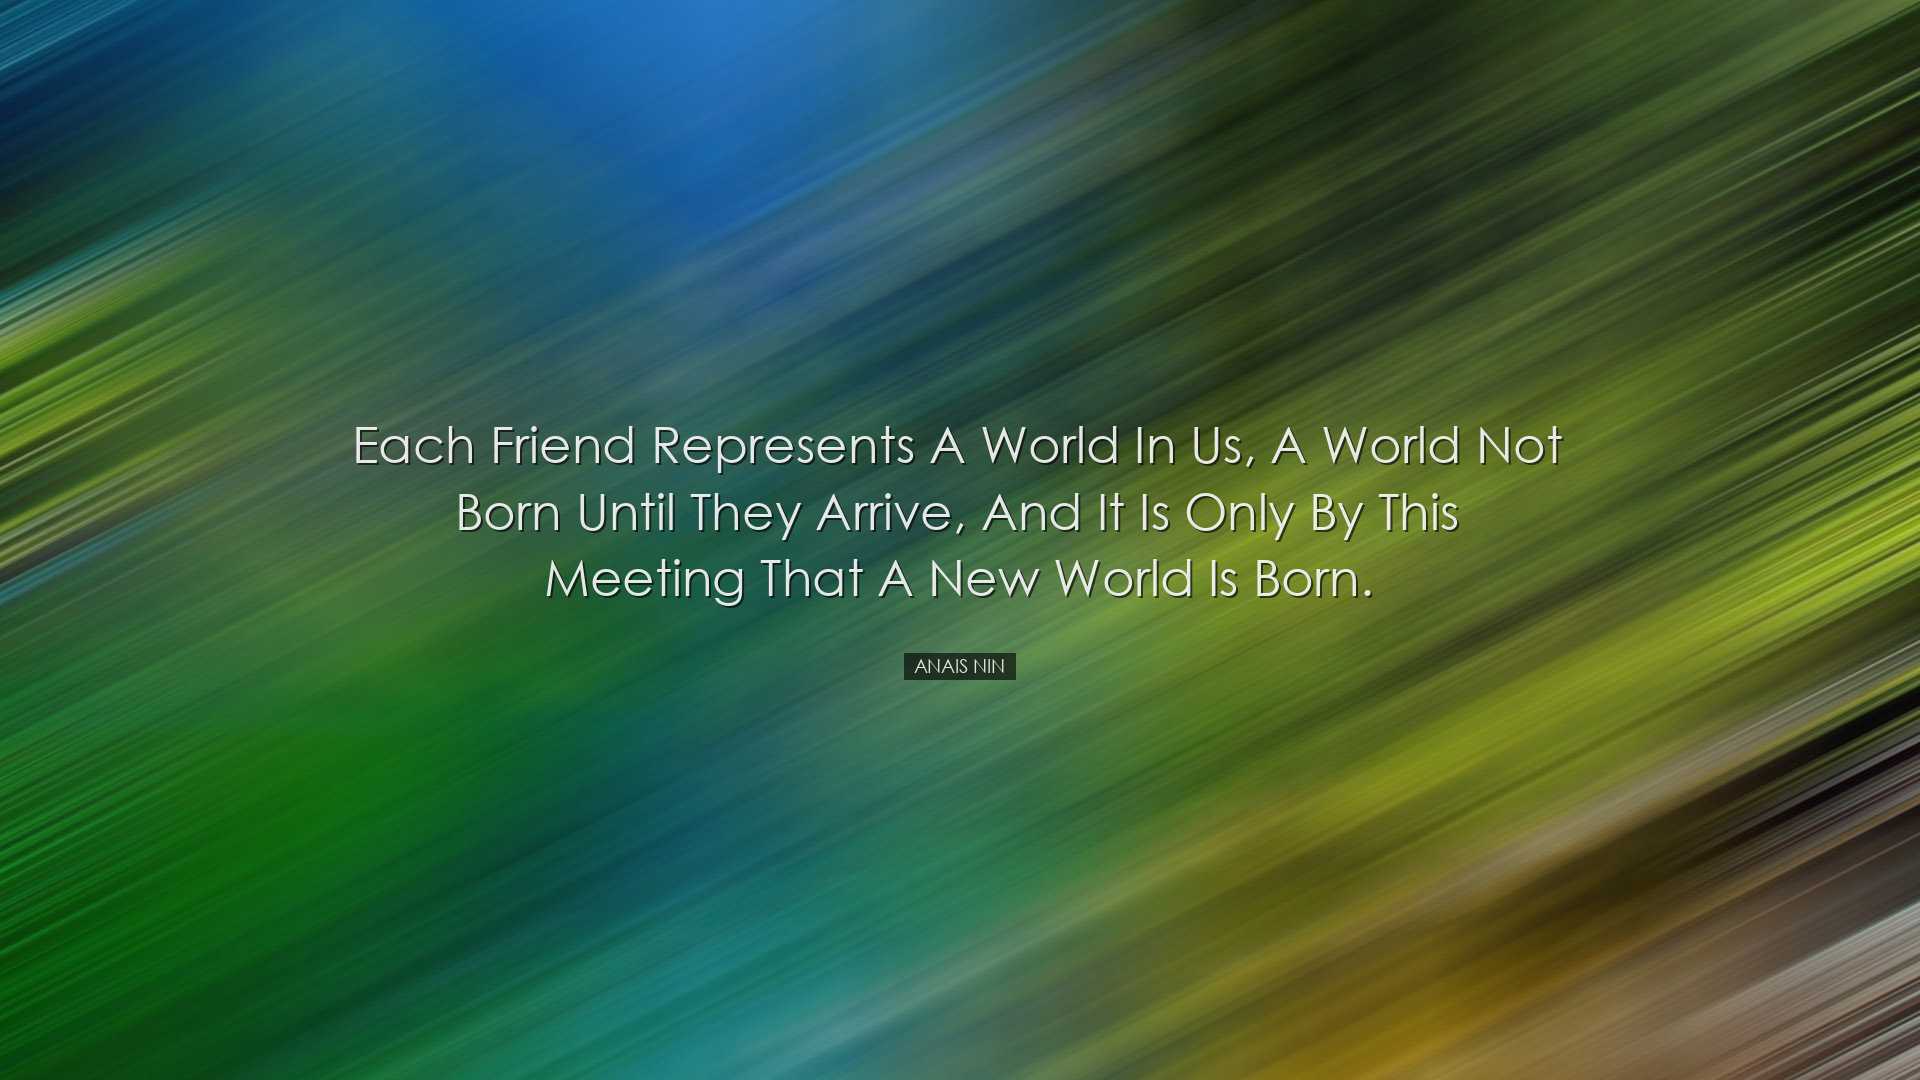 Each friend represents a world in us, a world not born until they